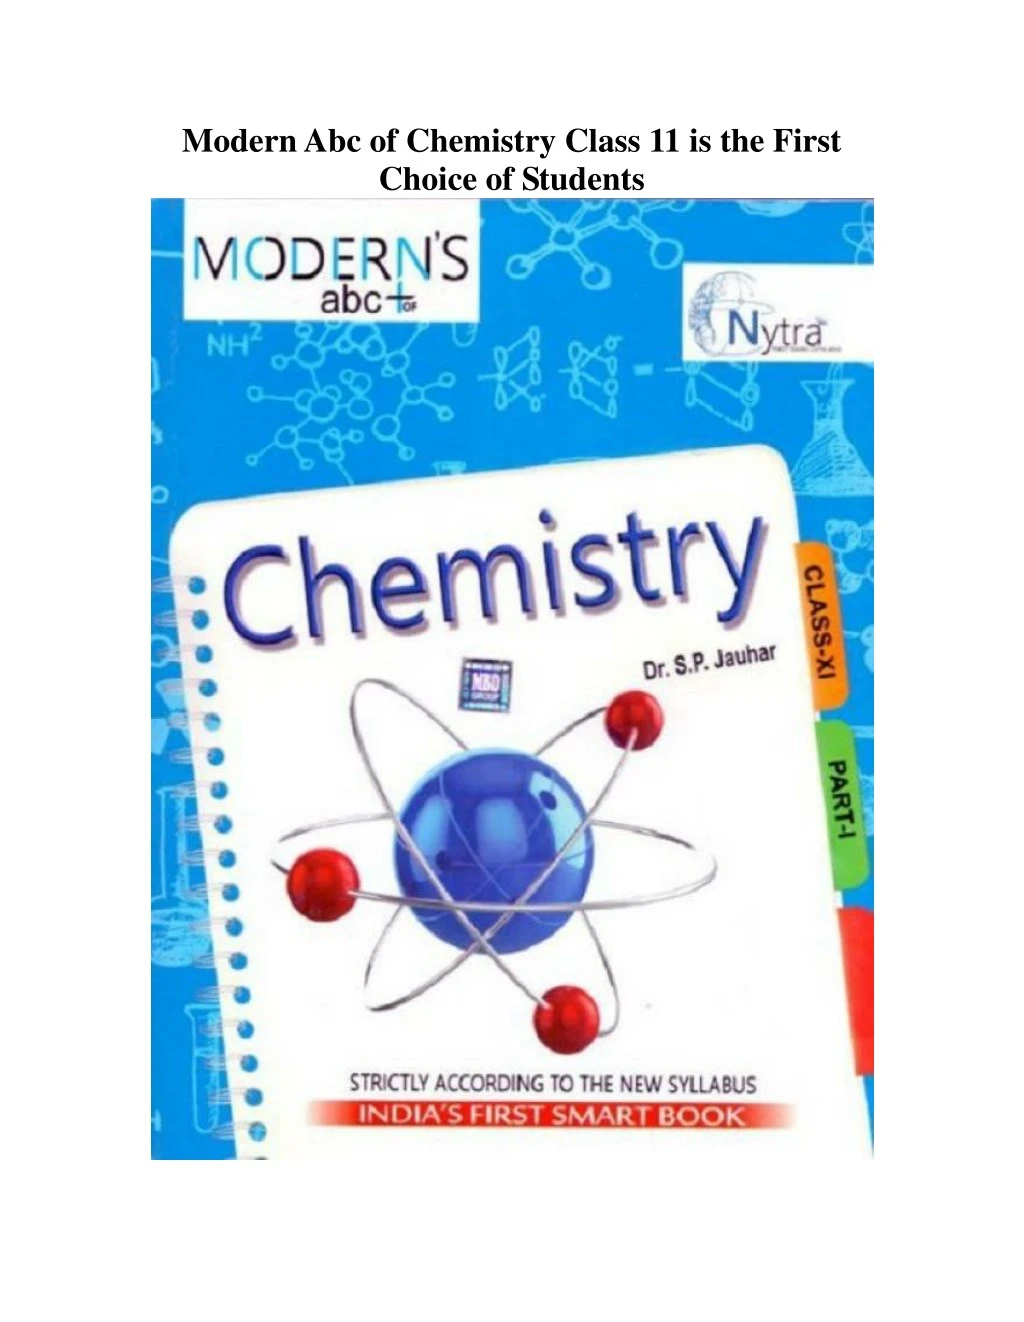 modern abc of chemistry class 11 is the first